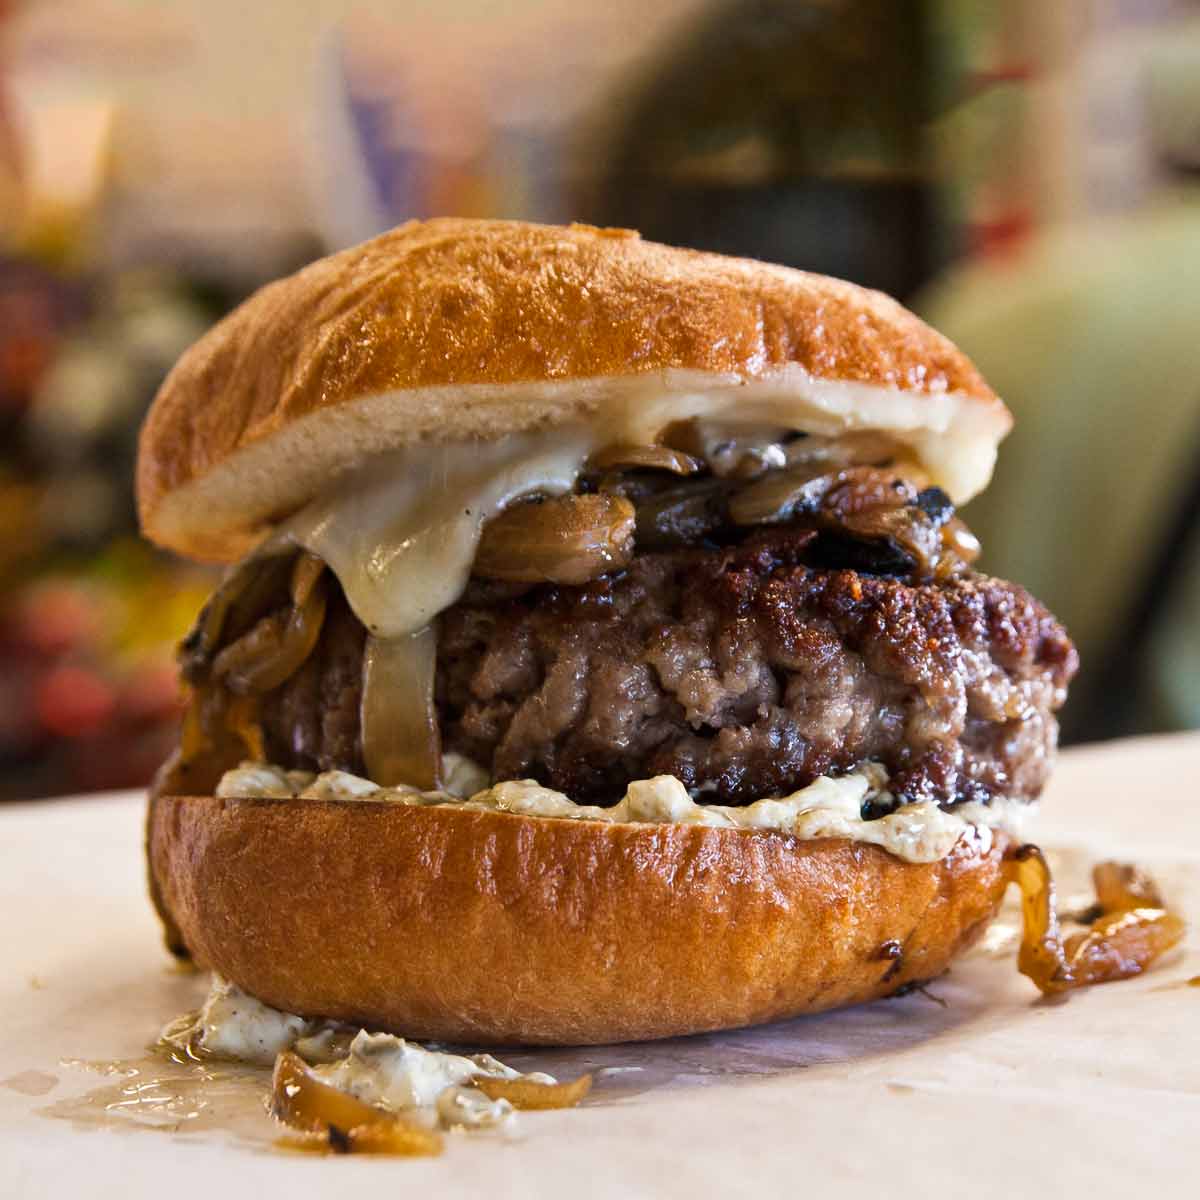 A best burger tucked inside a burger bun, topped with mushrooms, cheese, and caramelized onion.